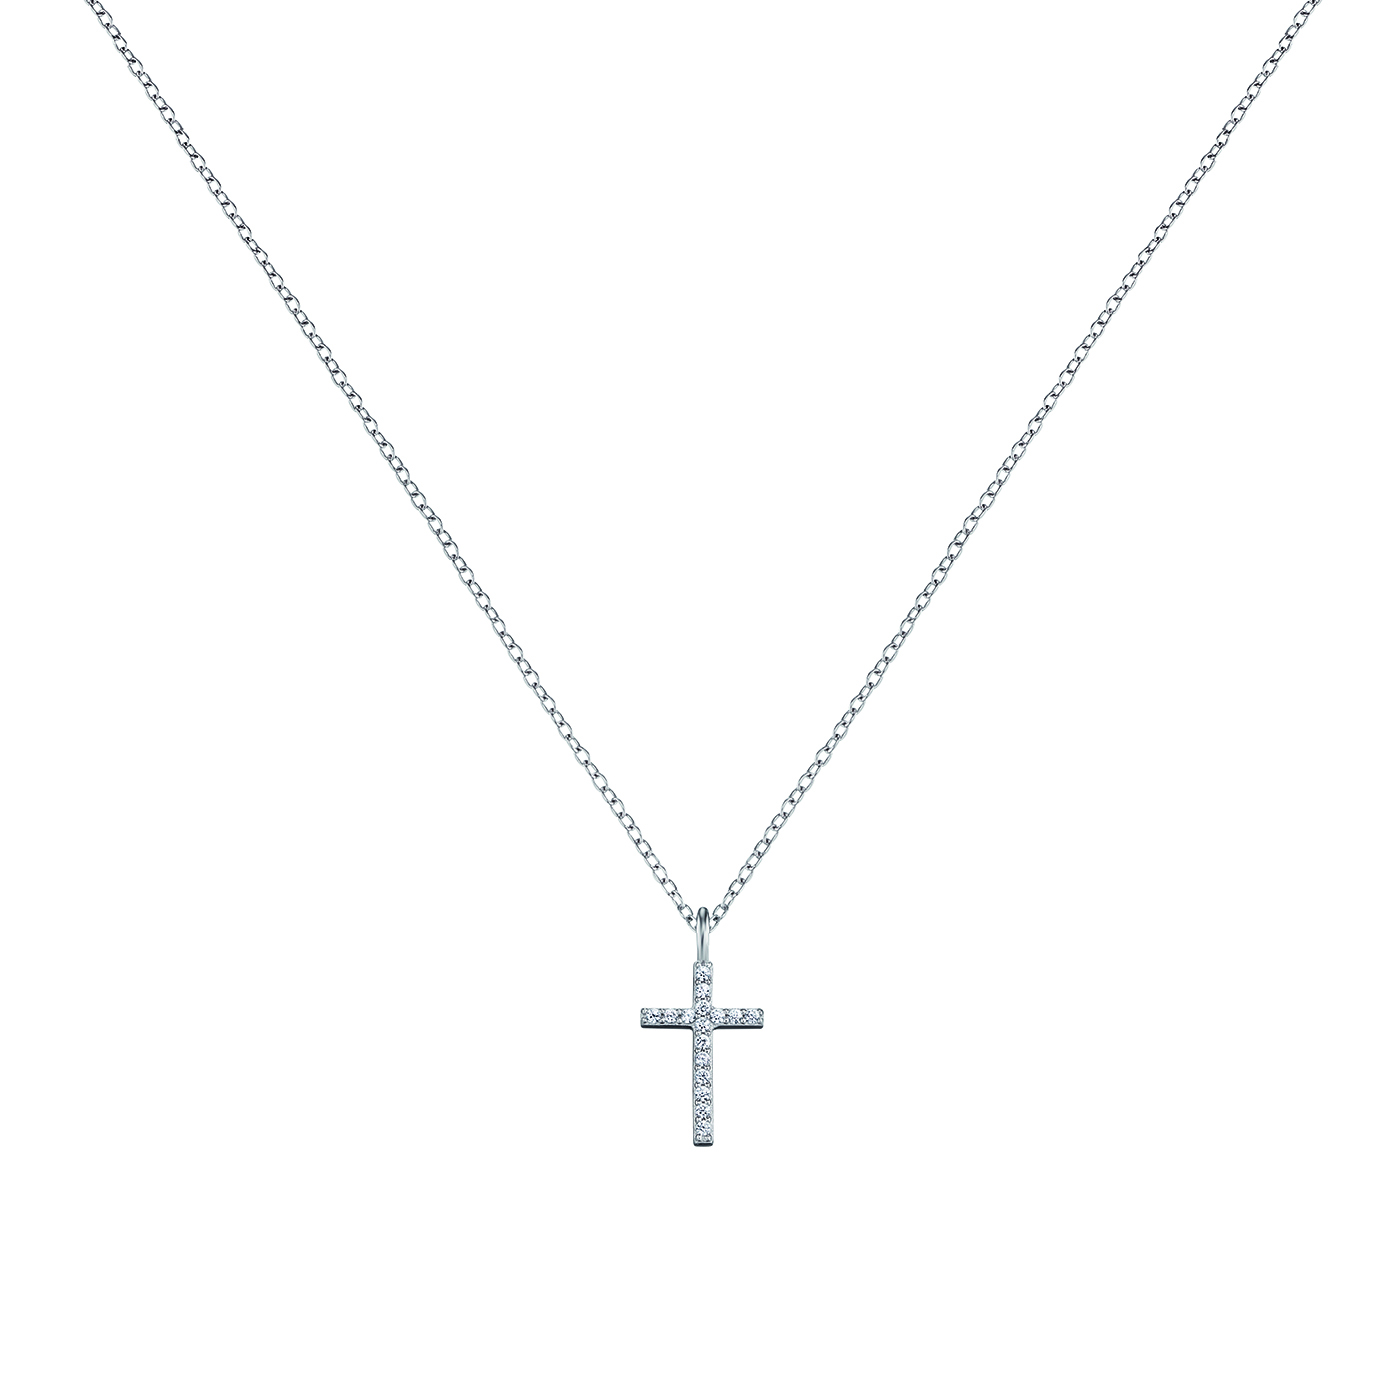 Engelsrufer Full of Faith Necklace 925 Silver Zirconia